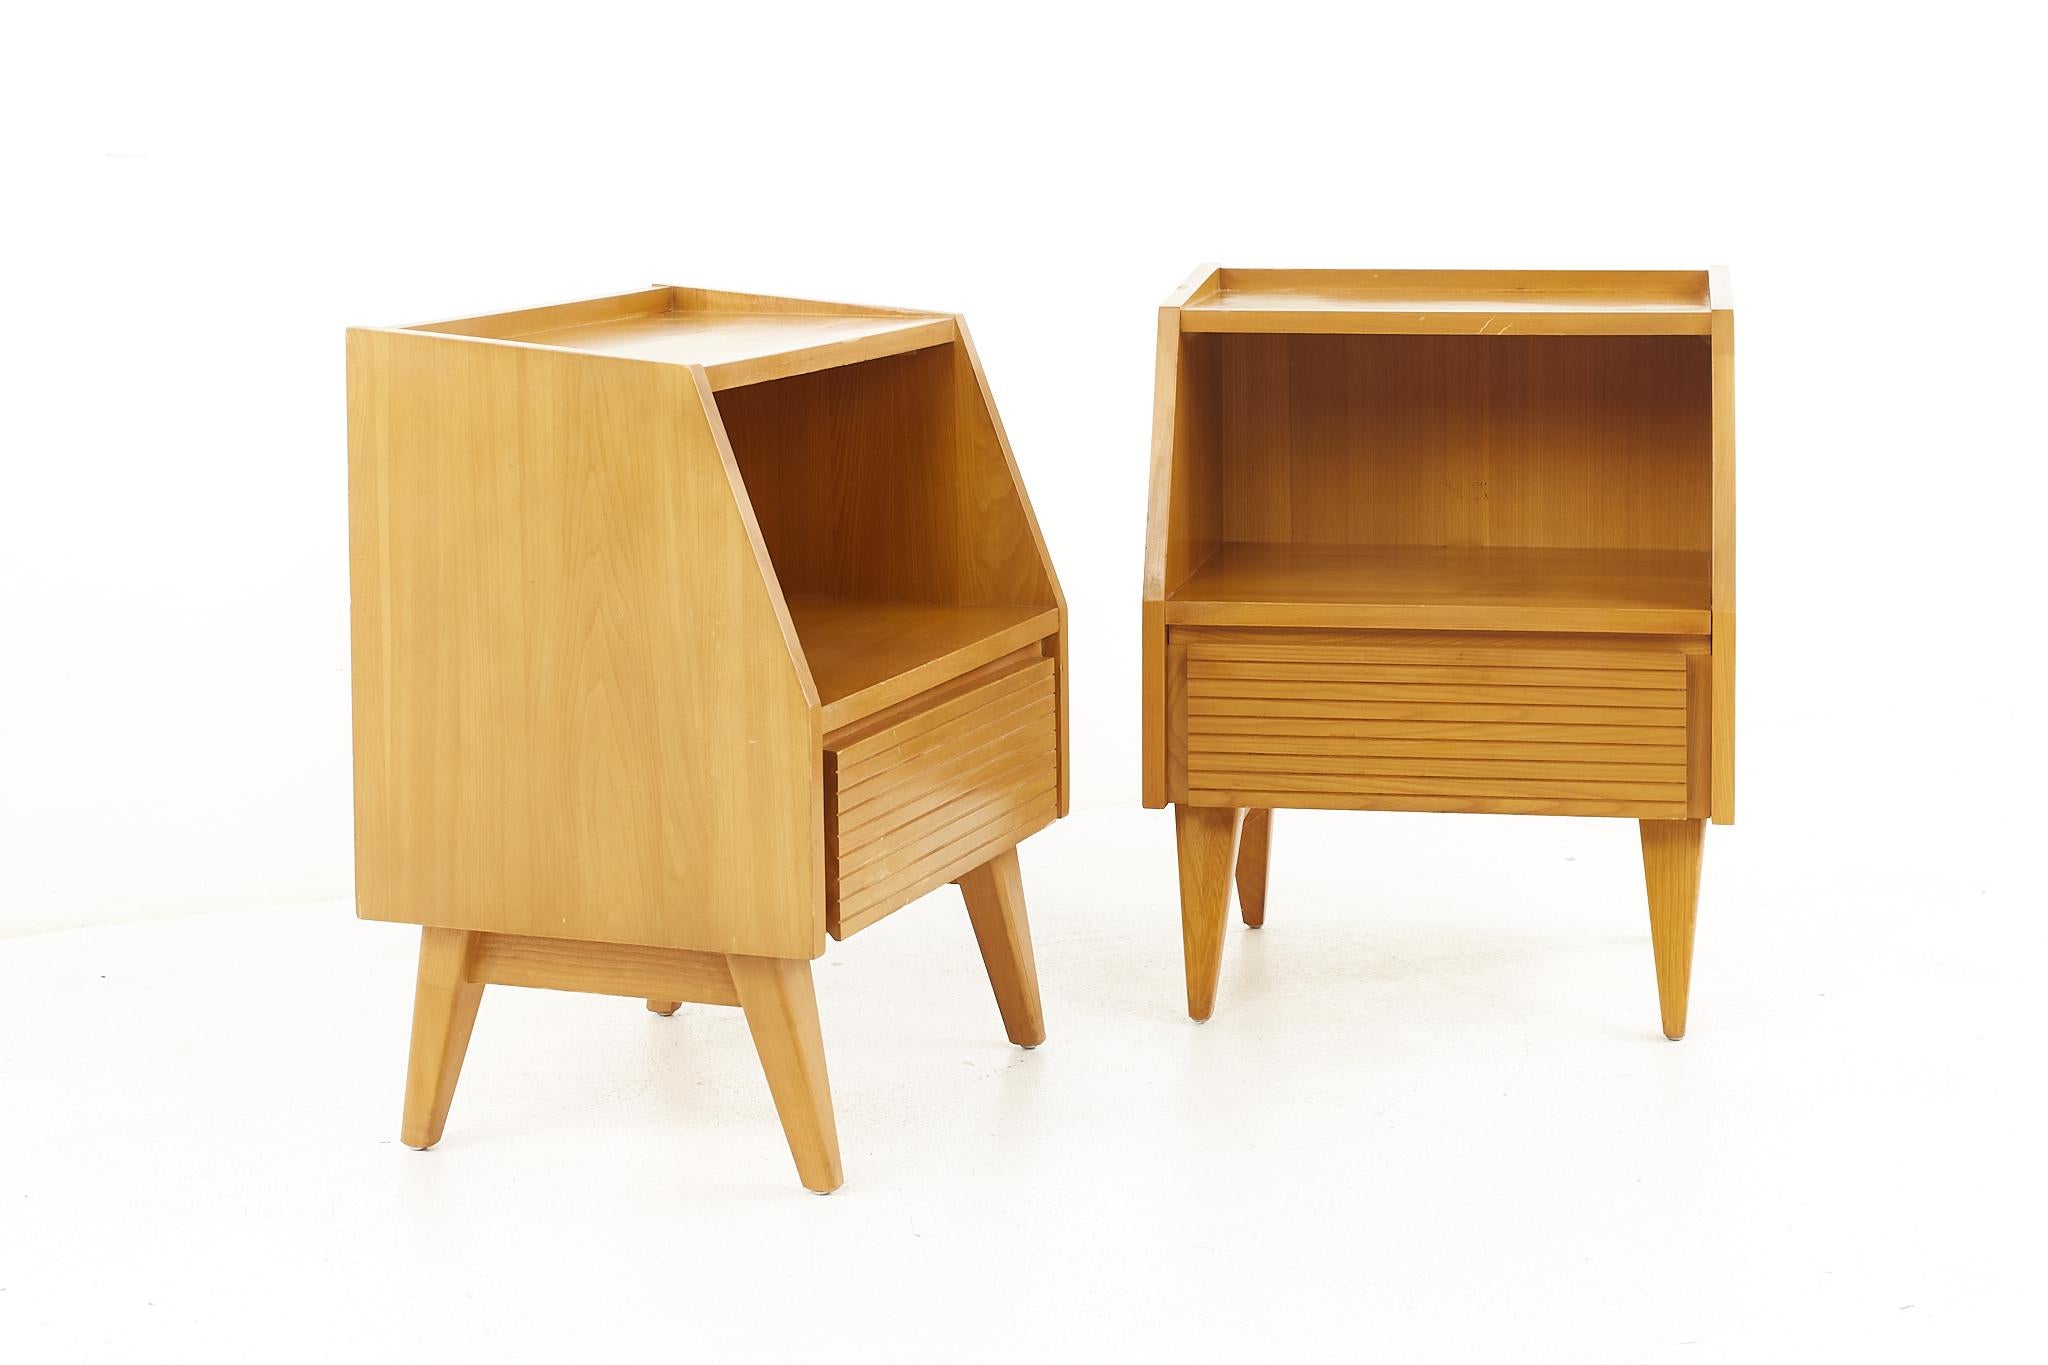 Conant Ball Mid Century Maple Nightstands - A Pair

Each nightstand measures: 19 wide x 14.5 deep x 24.25 inches high

All pieces of furniture can be had in what we call restored vintage condition. That means the piece is restored upon purchase